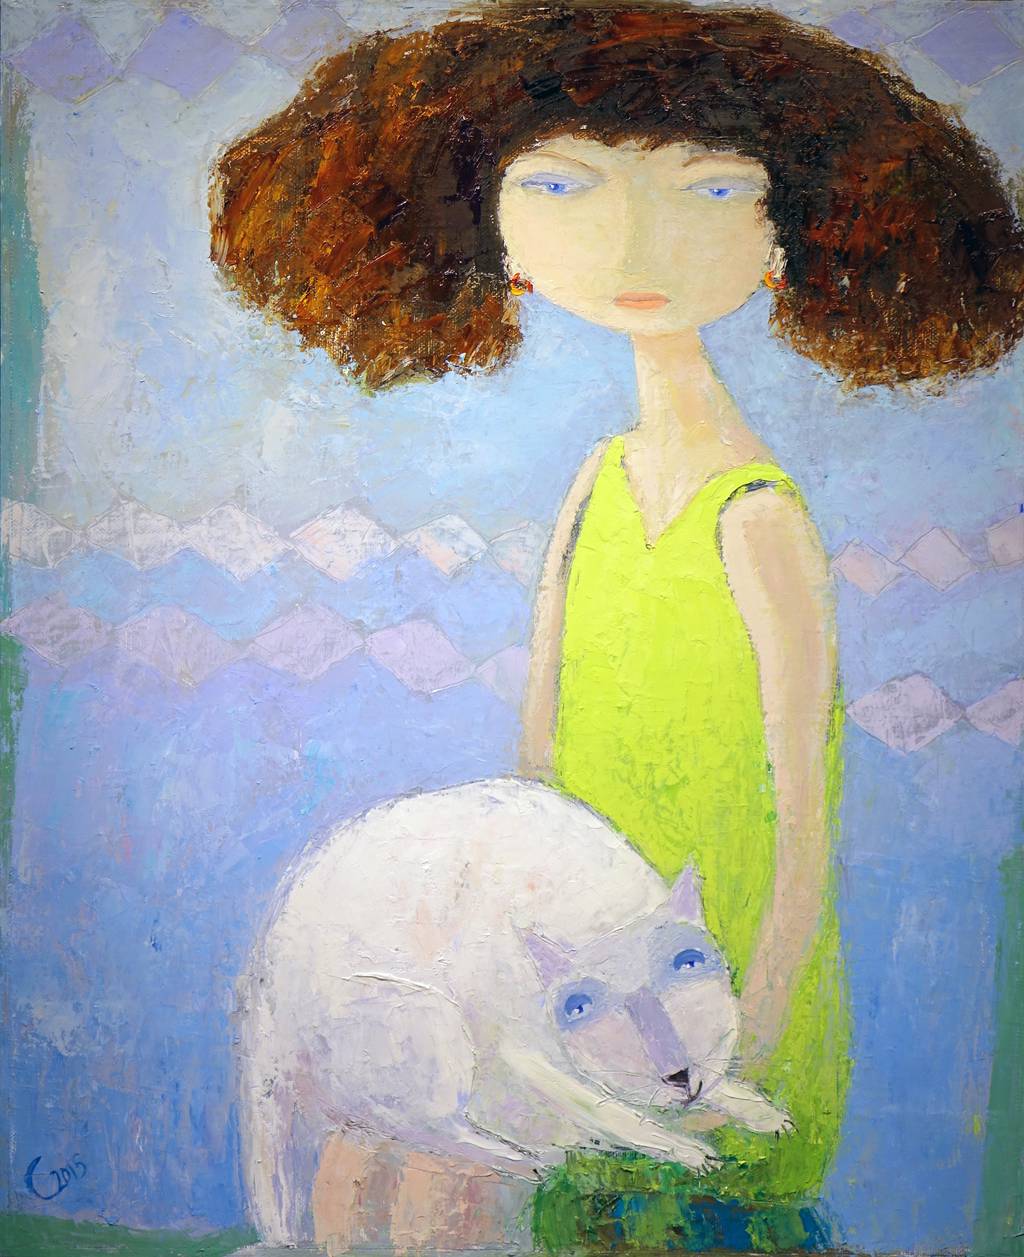 Cat and June, 100x80cm., oil on canvas, 2015